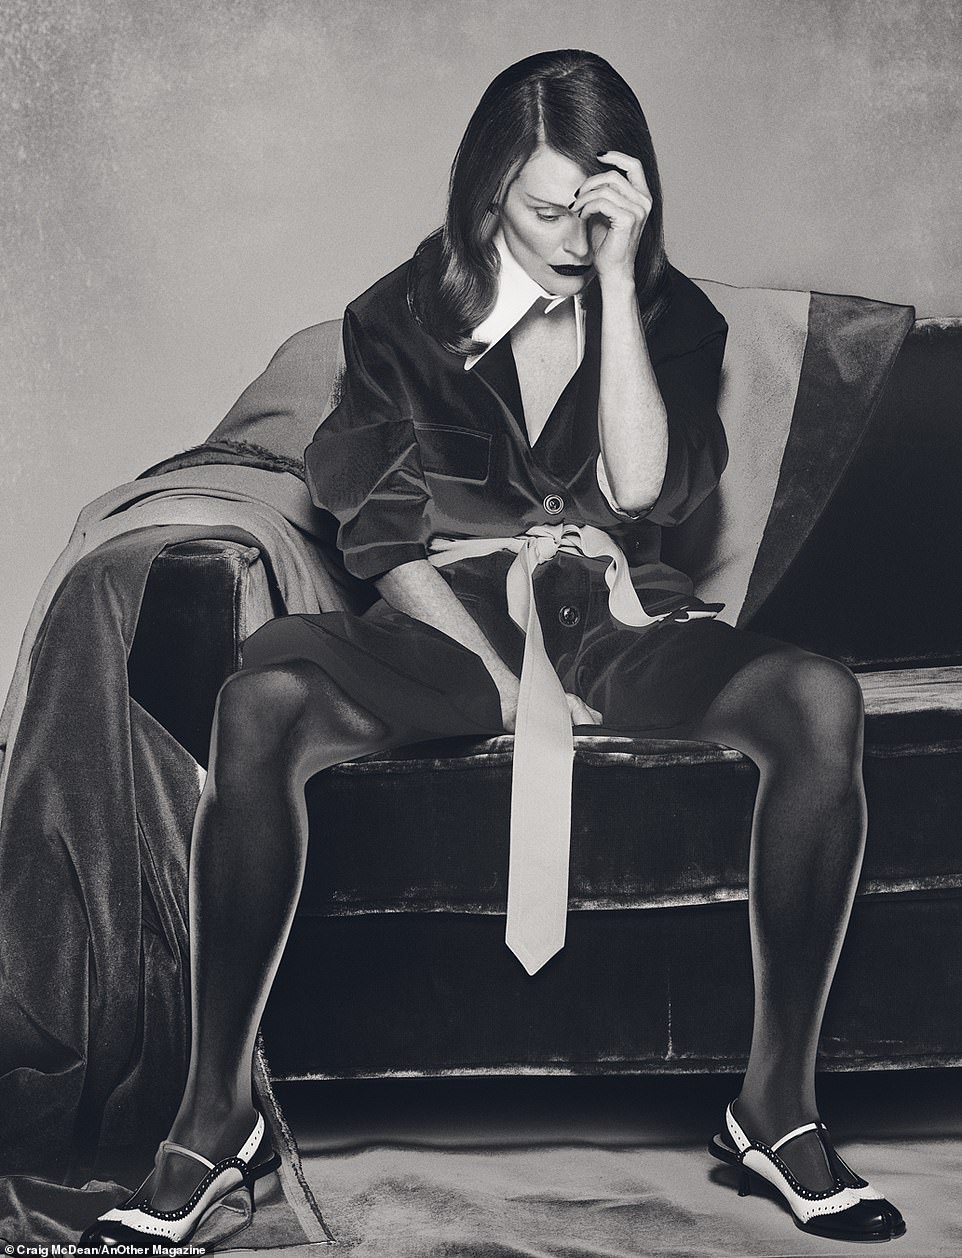 Another photo taken by photographer Craig McDean and styled by Katie Shillingford shows Julianne sitting on a couch looking dejectedly at her hand while wearing a velvet jacket with a large, pointed white collar and a men's tie as a belt from Maison Margiela.